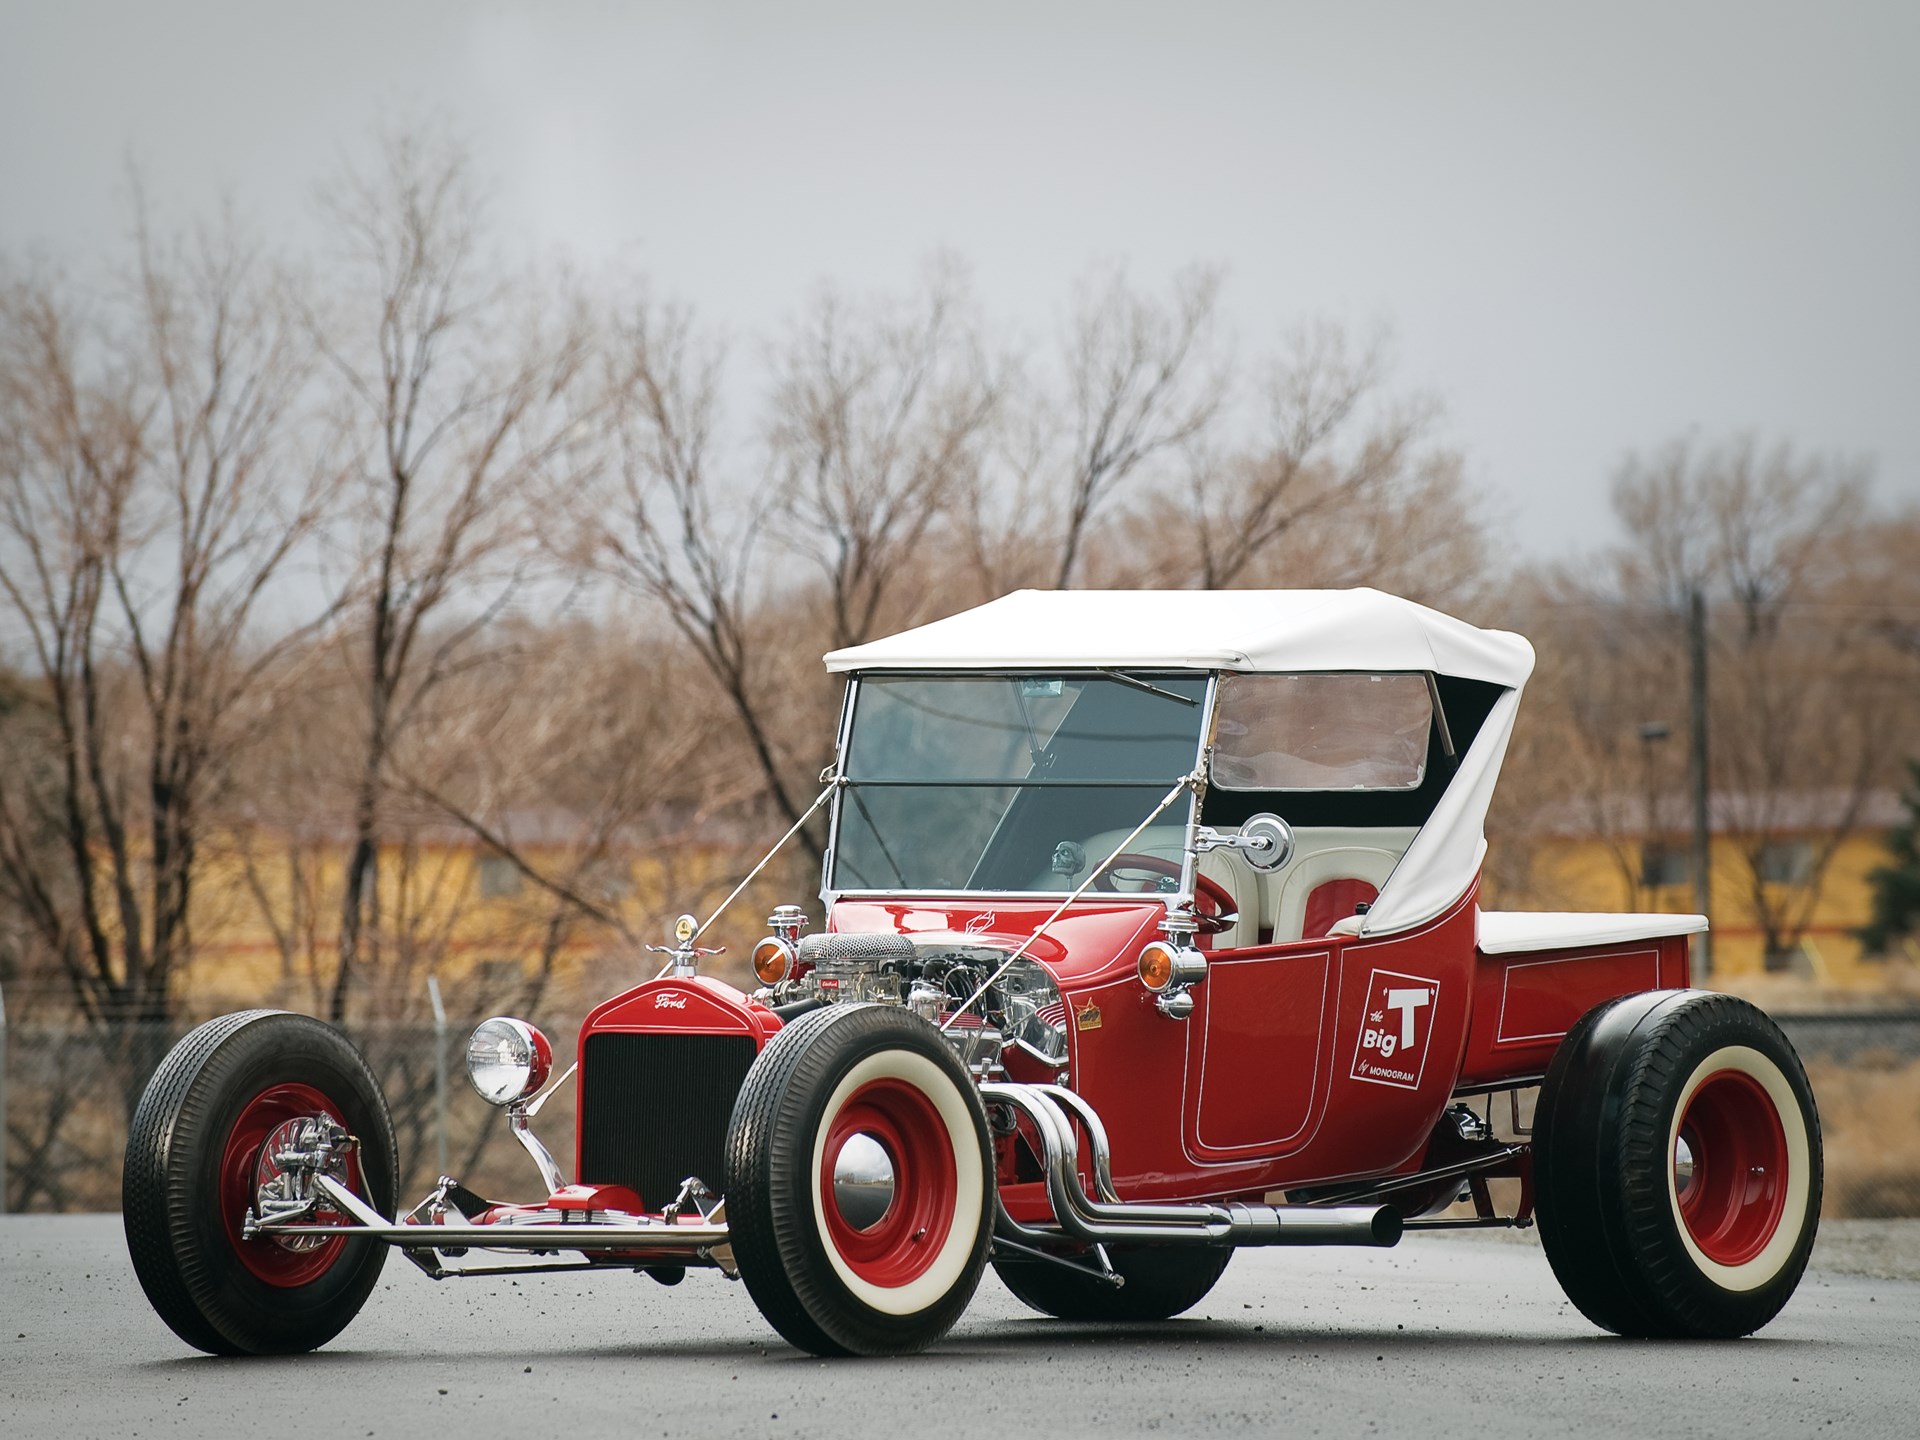 1923 Ford "Big T" Roadster Pickup for sale at RM Sotheby&...